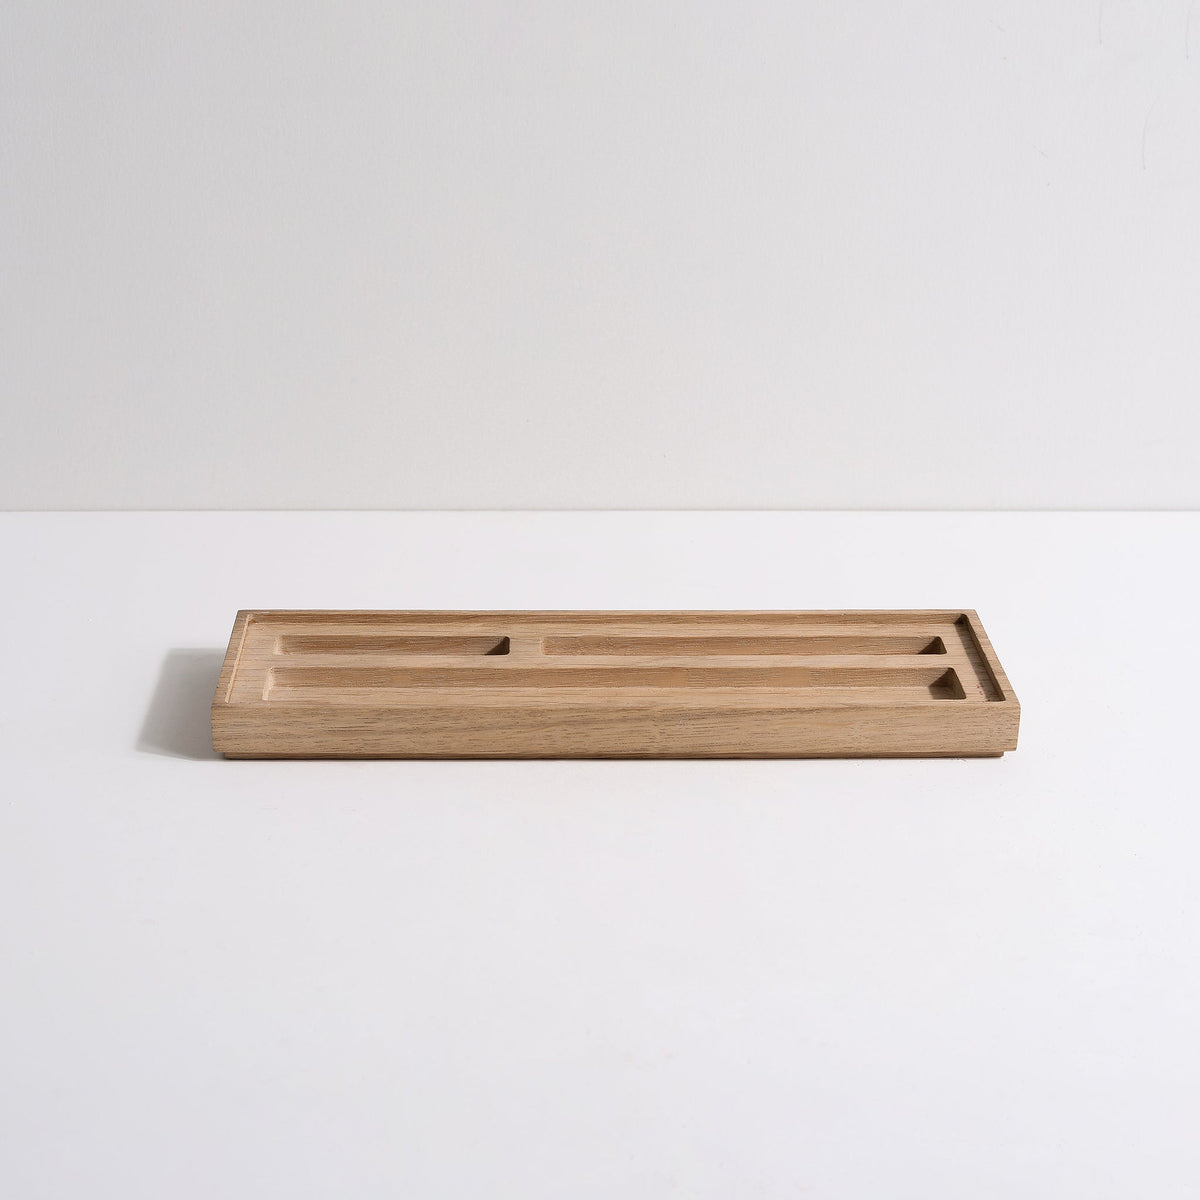 White oak wooden base for incense burners by Kin Objects